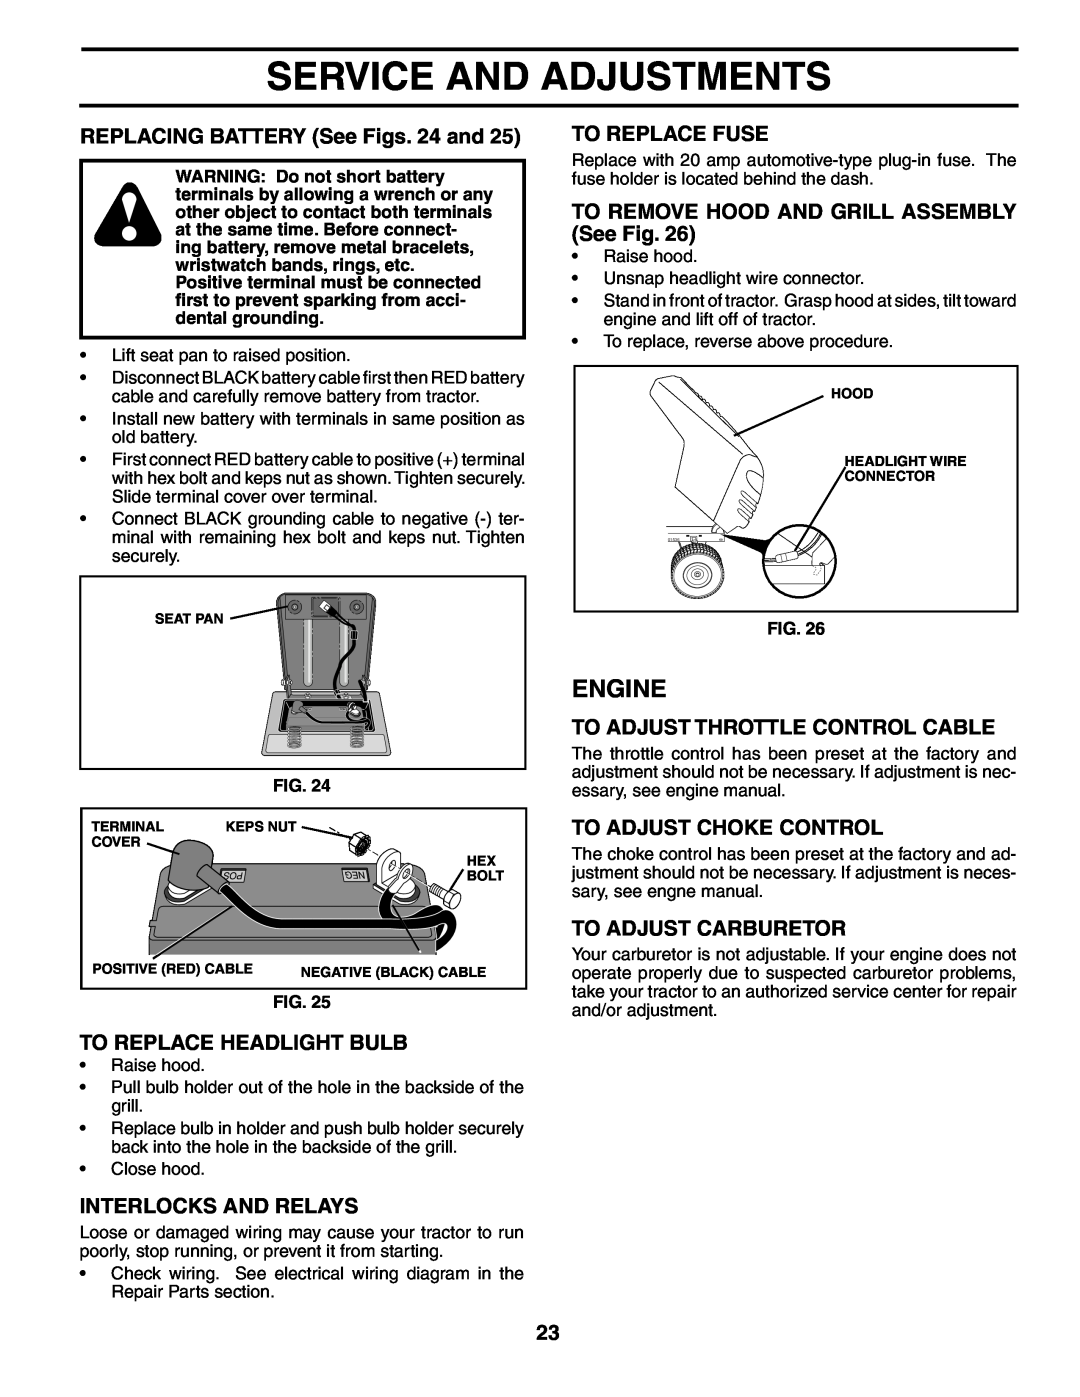 Weed Eater 96016001400 manual REPLACING BATTERY See Figs. 24 and, To Replace Headlight Bulb, Interlocks And Relays, Engine 